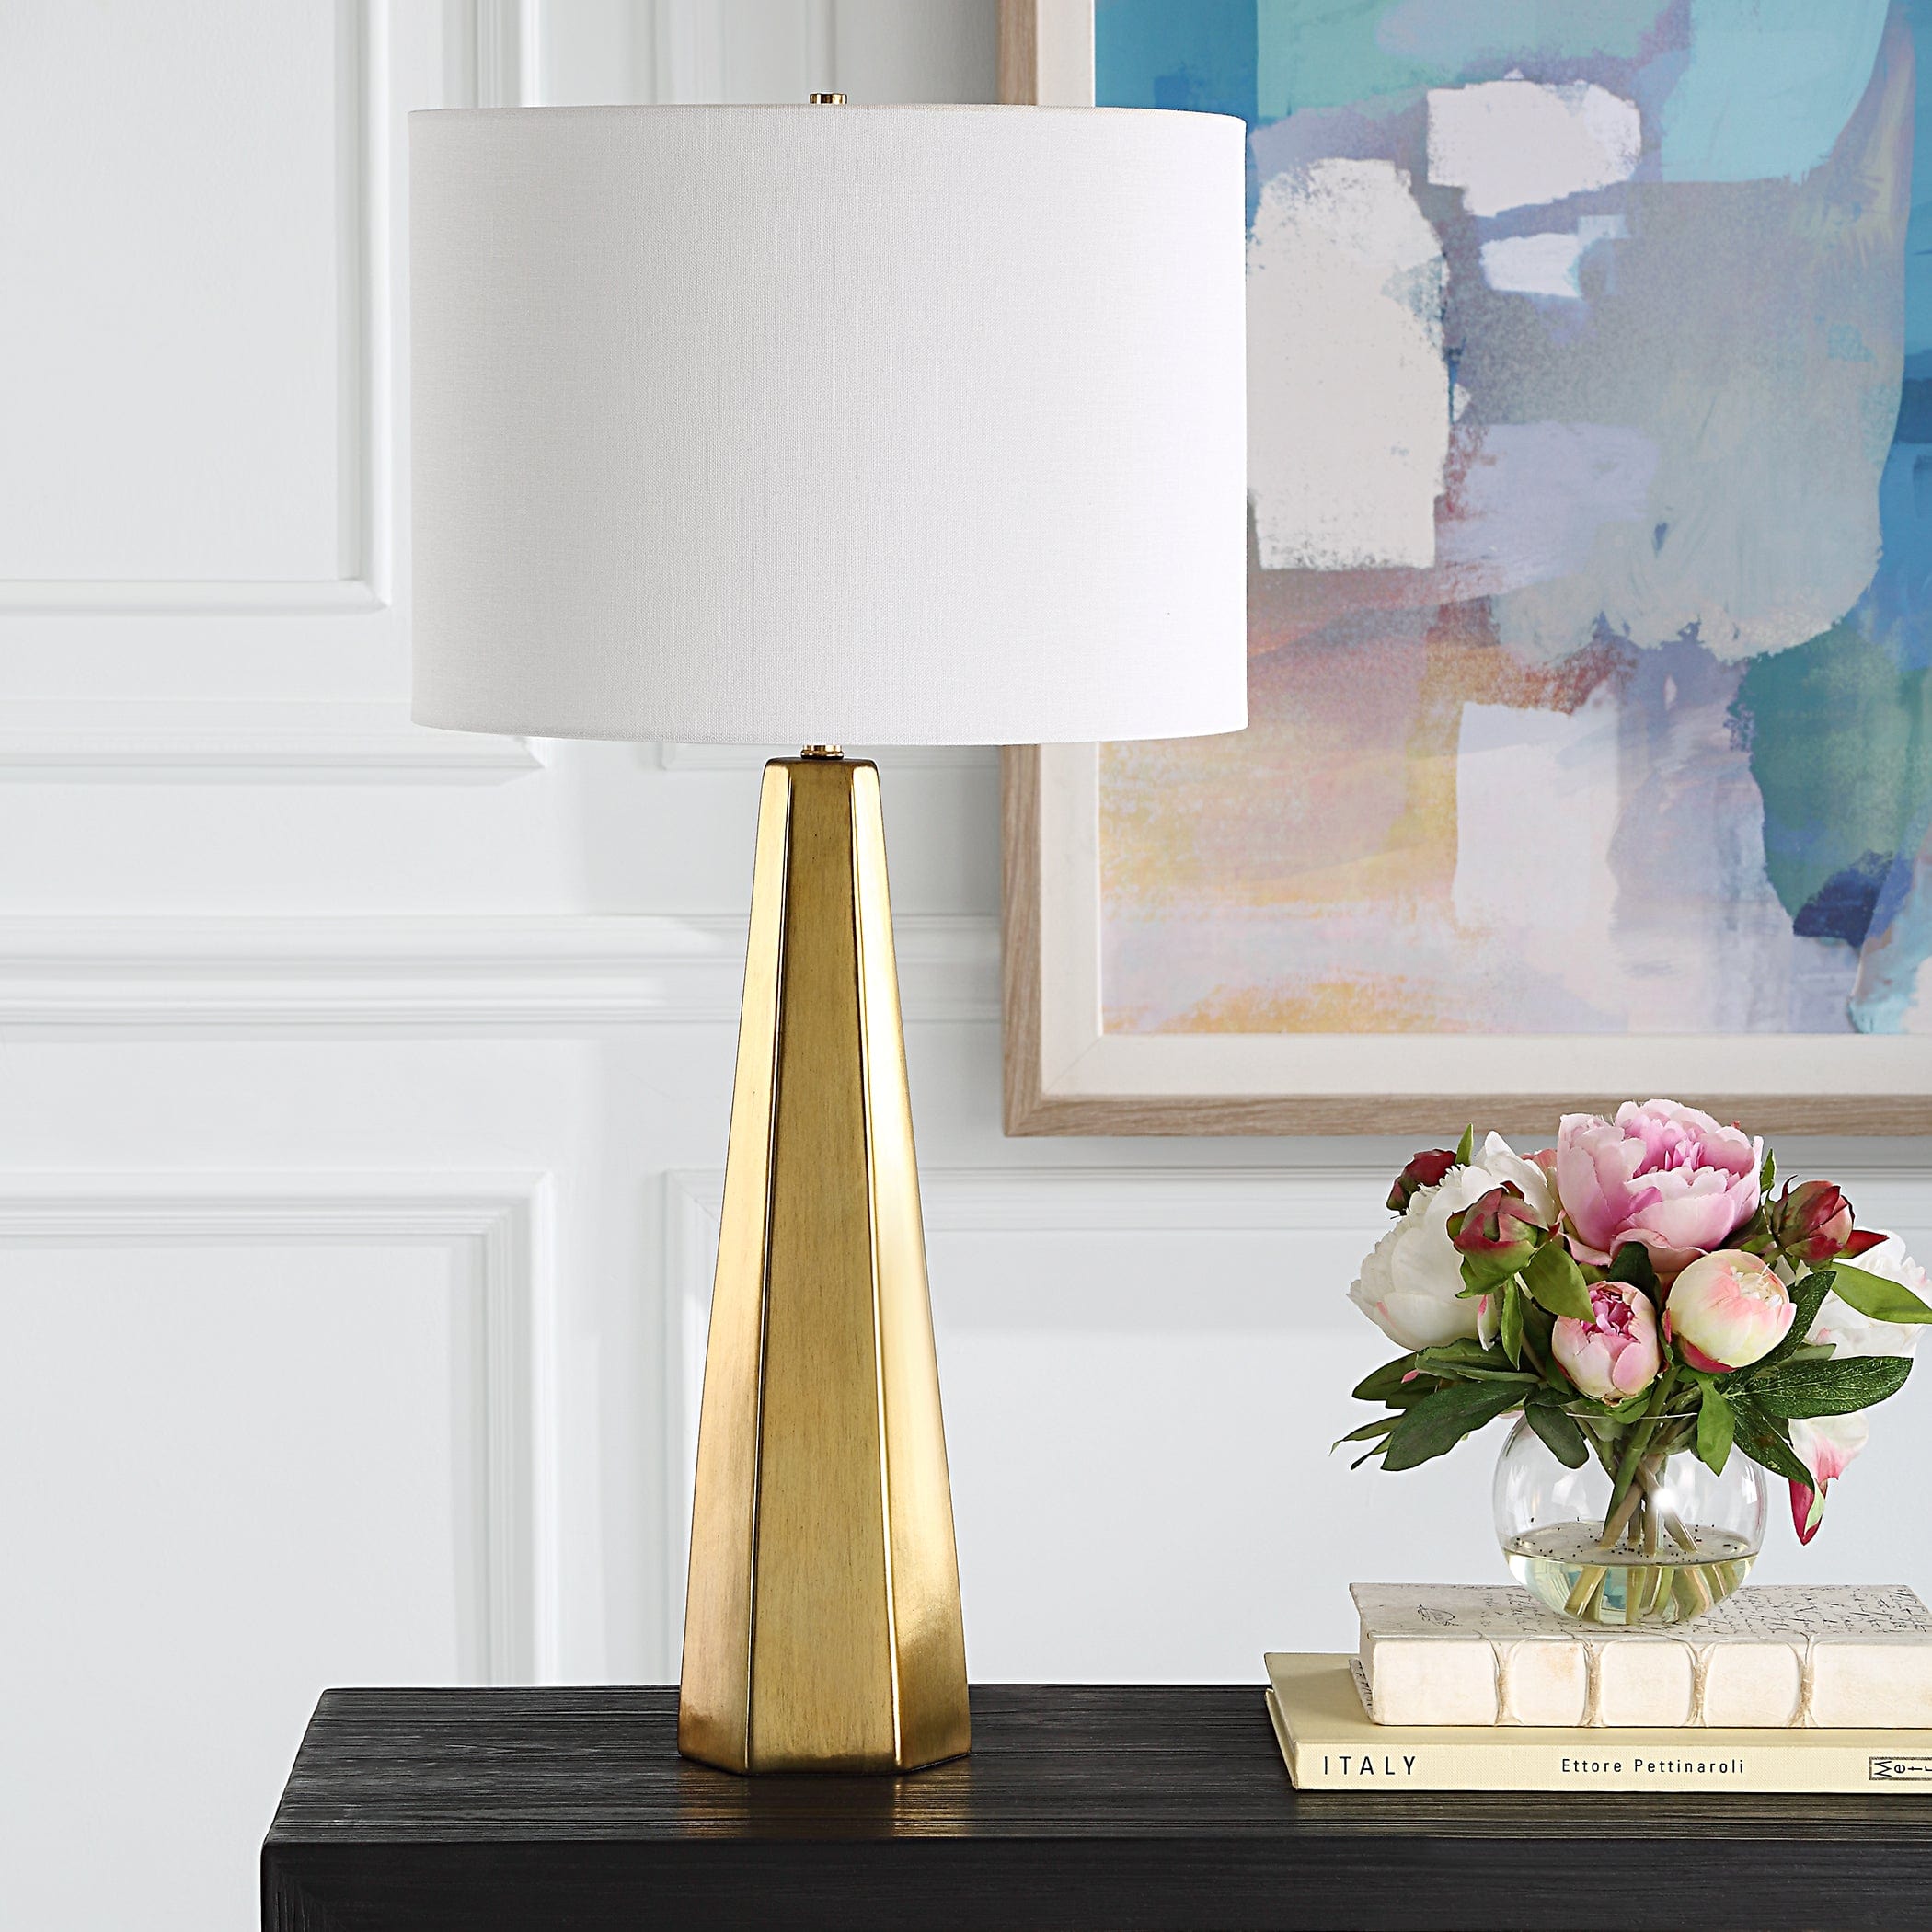 TABLE LAMP WL-15 Uttermost